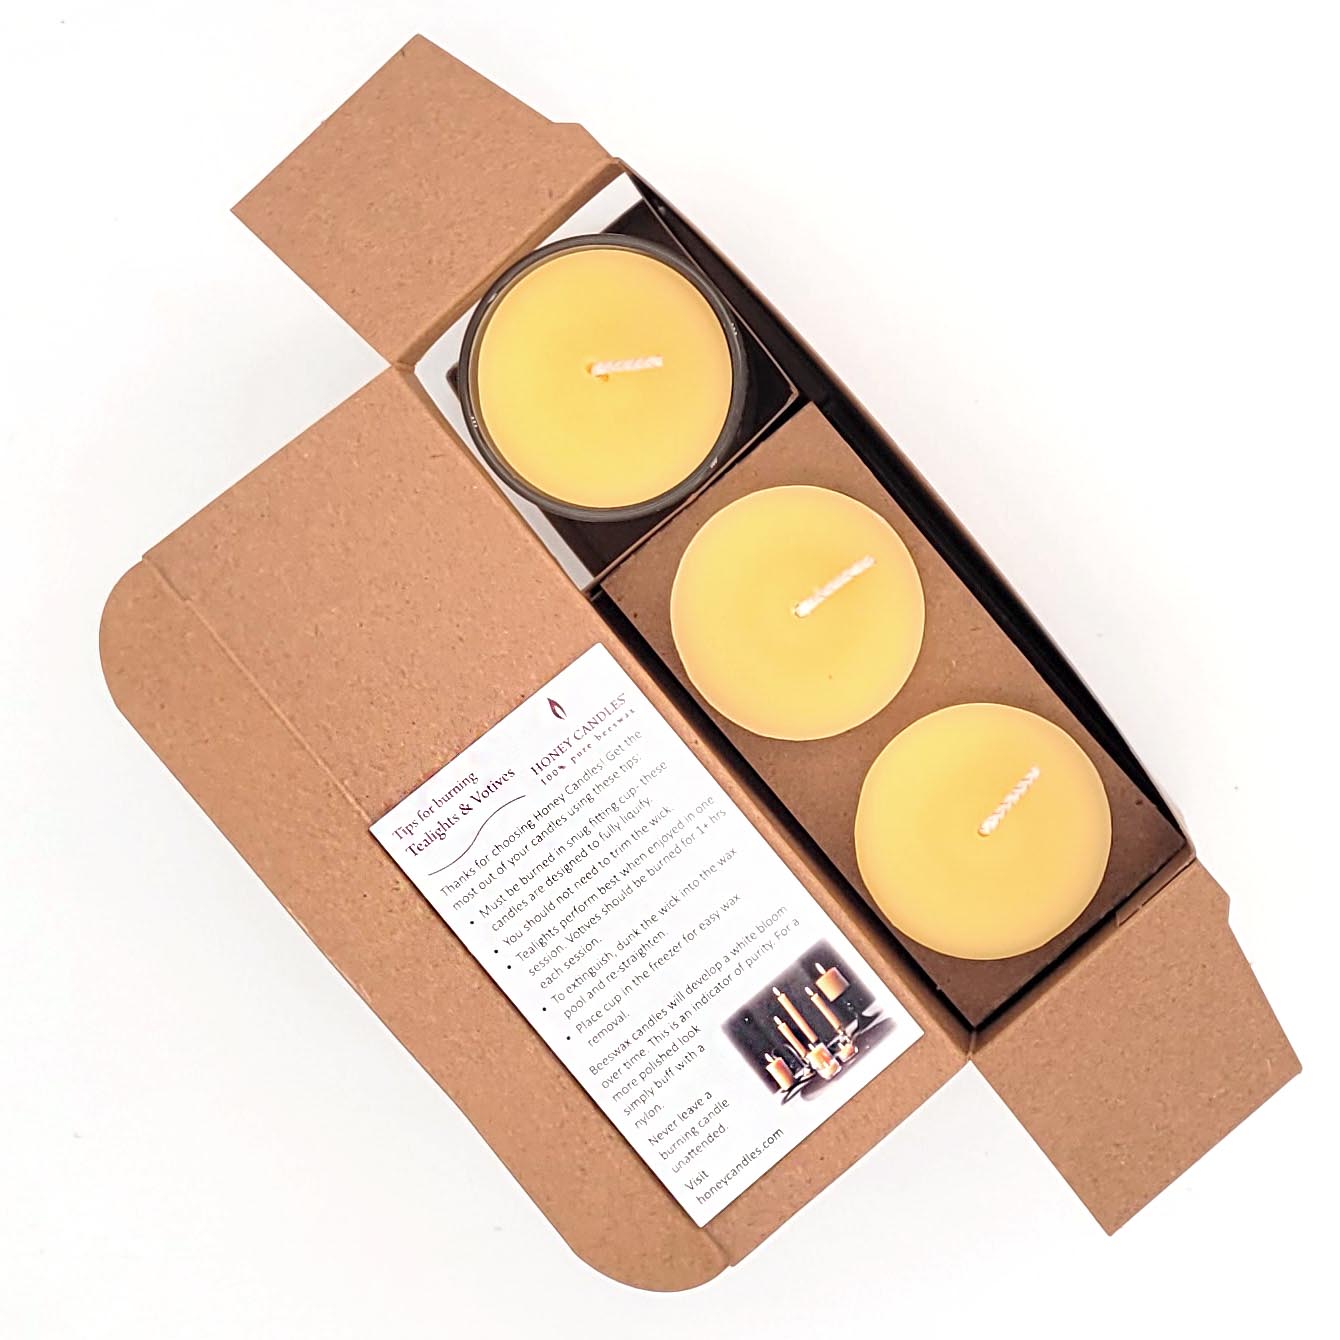 Beeswax scented votive candle 3 pack inside view